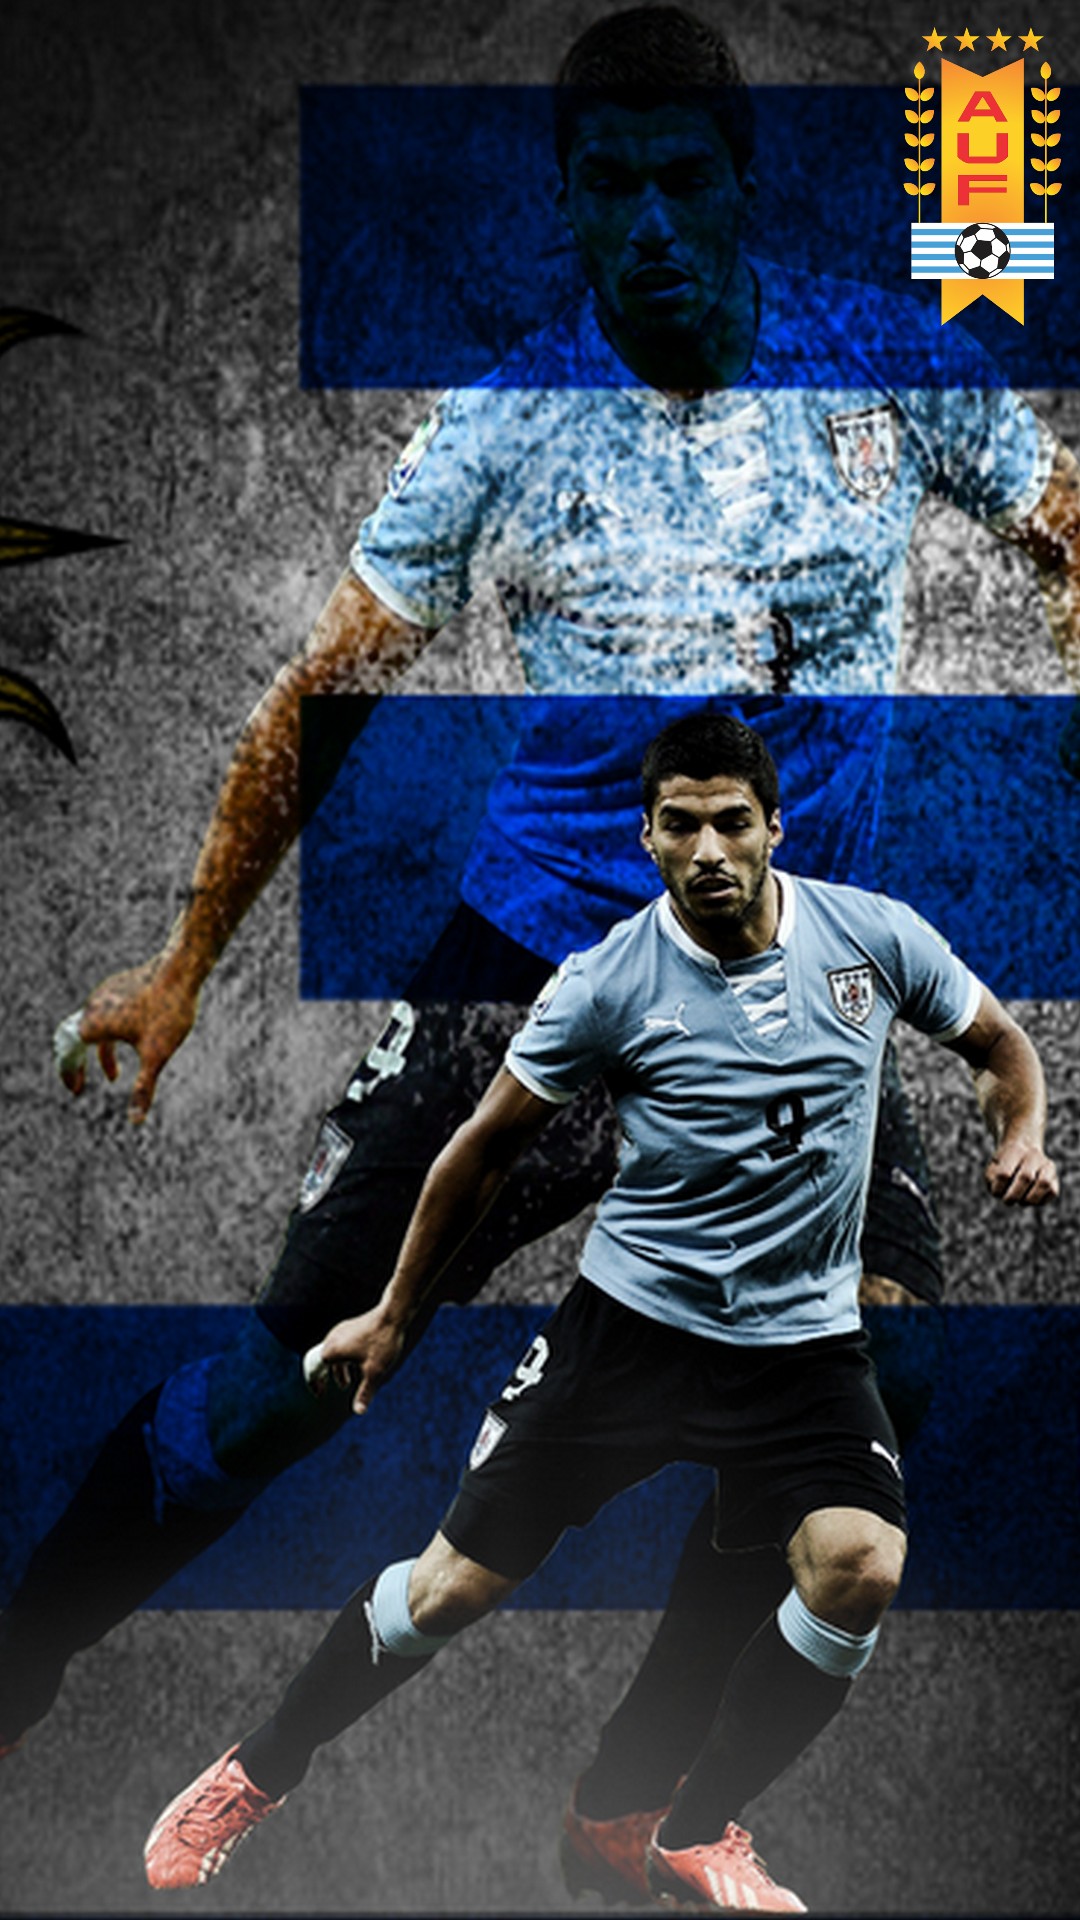 Luis Suarez Uruguay HD Wallpaper For iPhone with resolution 1080x1920 pixel. You can make this wallpaper for your Mac or Windows Desktop Background, iPhone, Android or Tablet and another Smartphone device